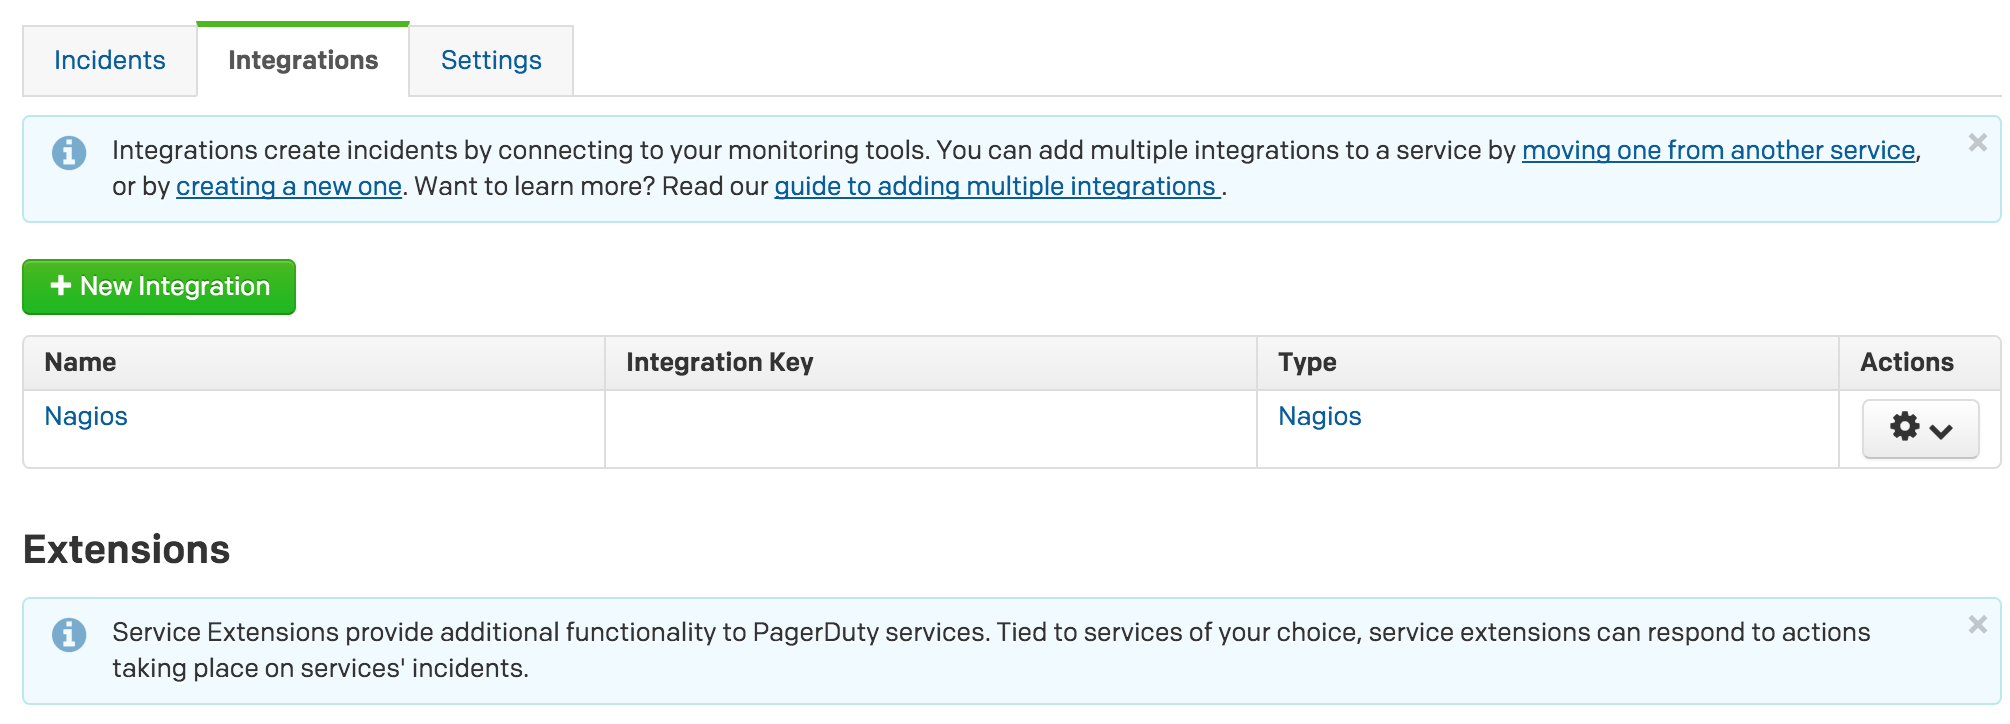 Integrate Nagios with PagerDuty